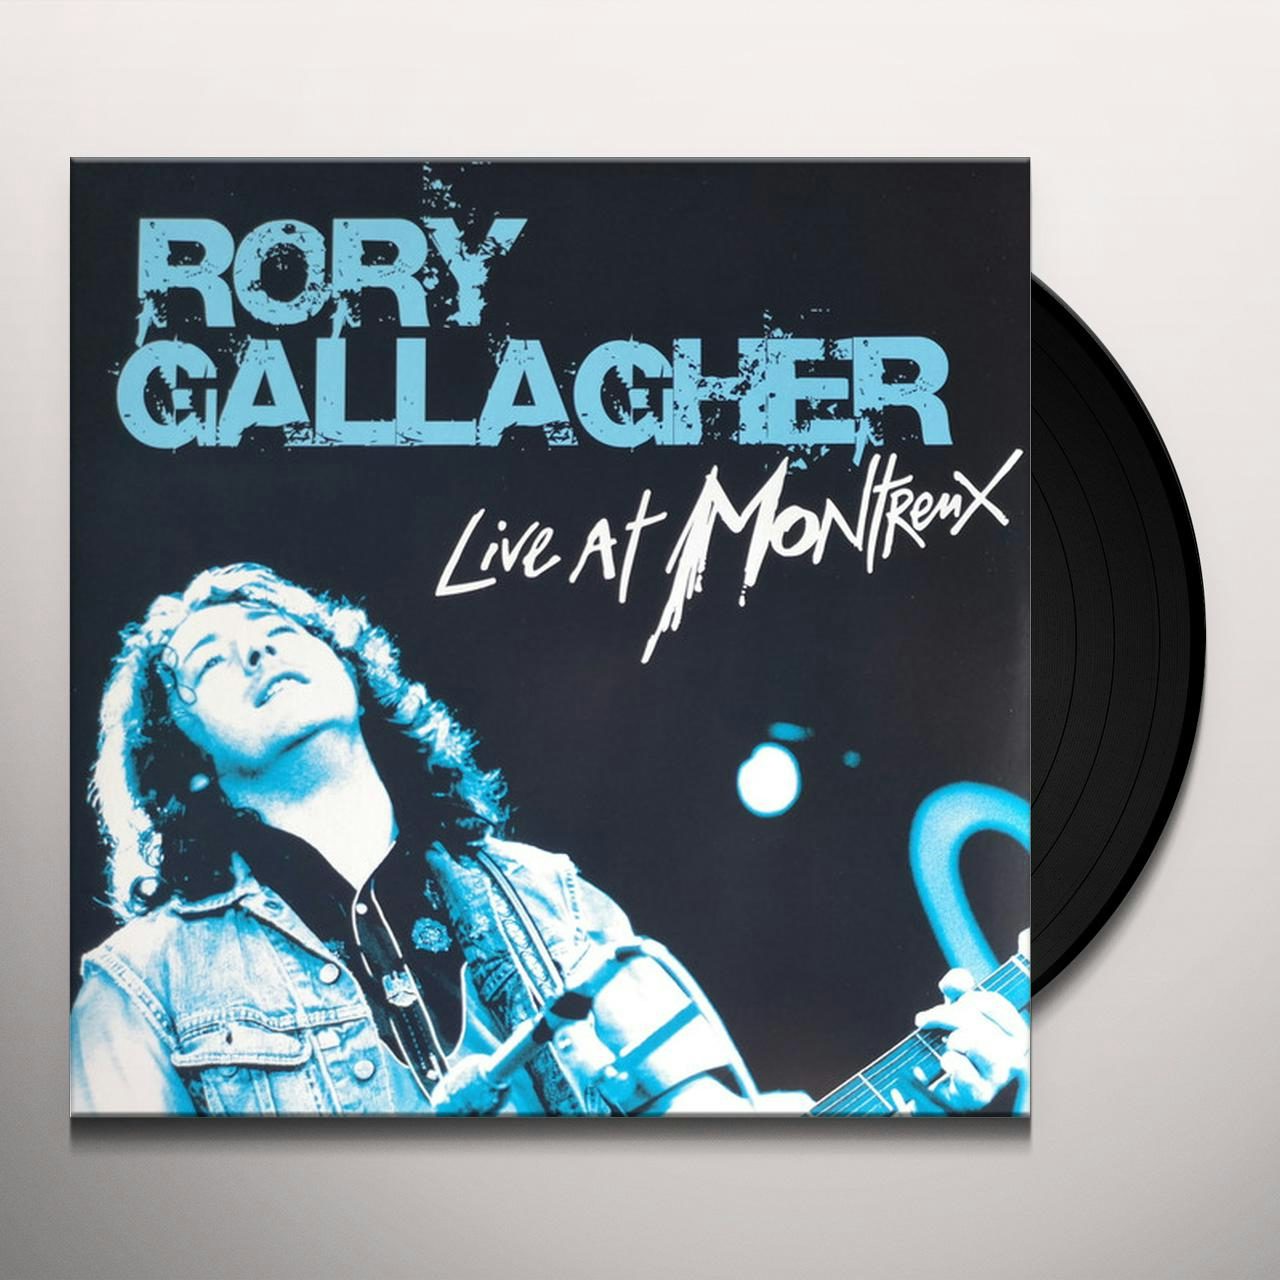 Rory Gallagher Live At Montreux Vinyl Record